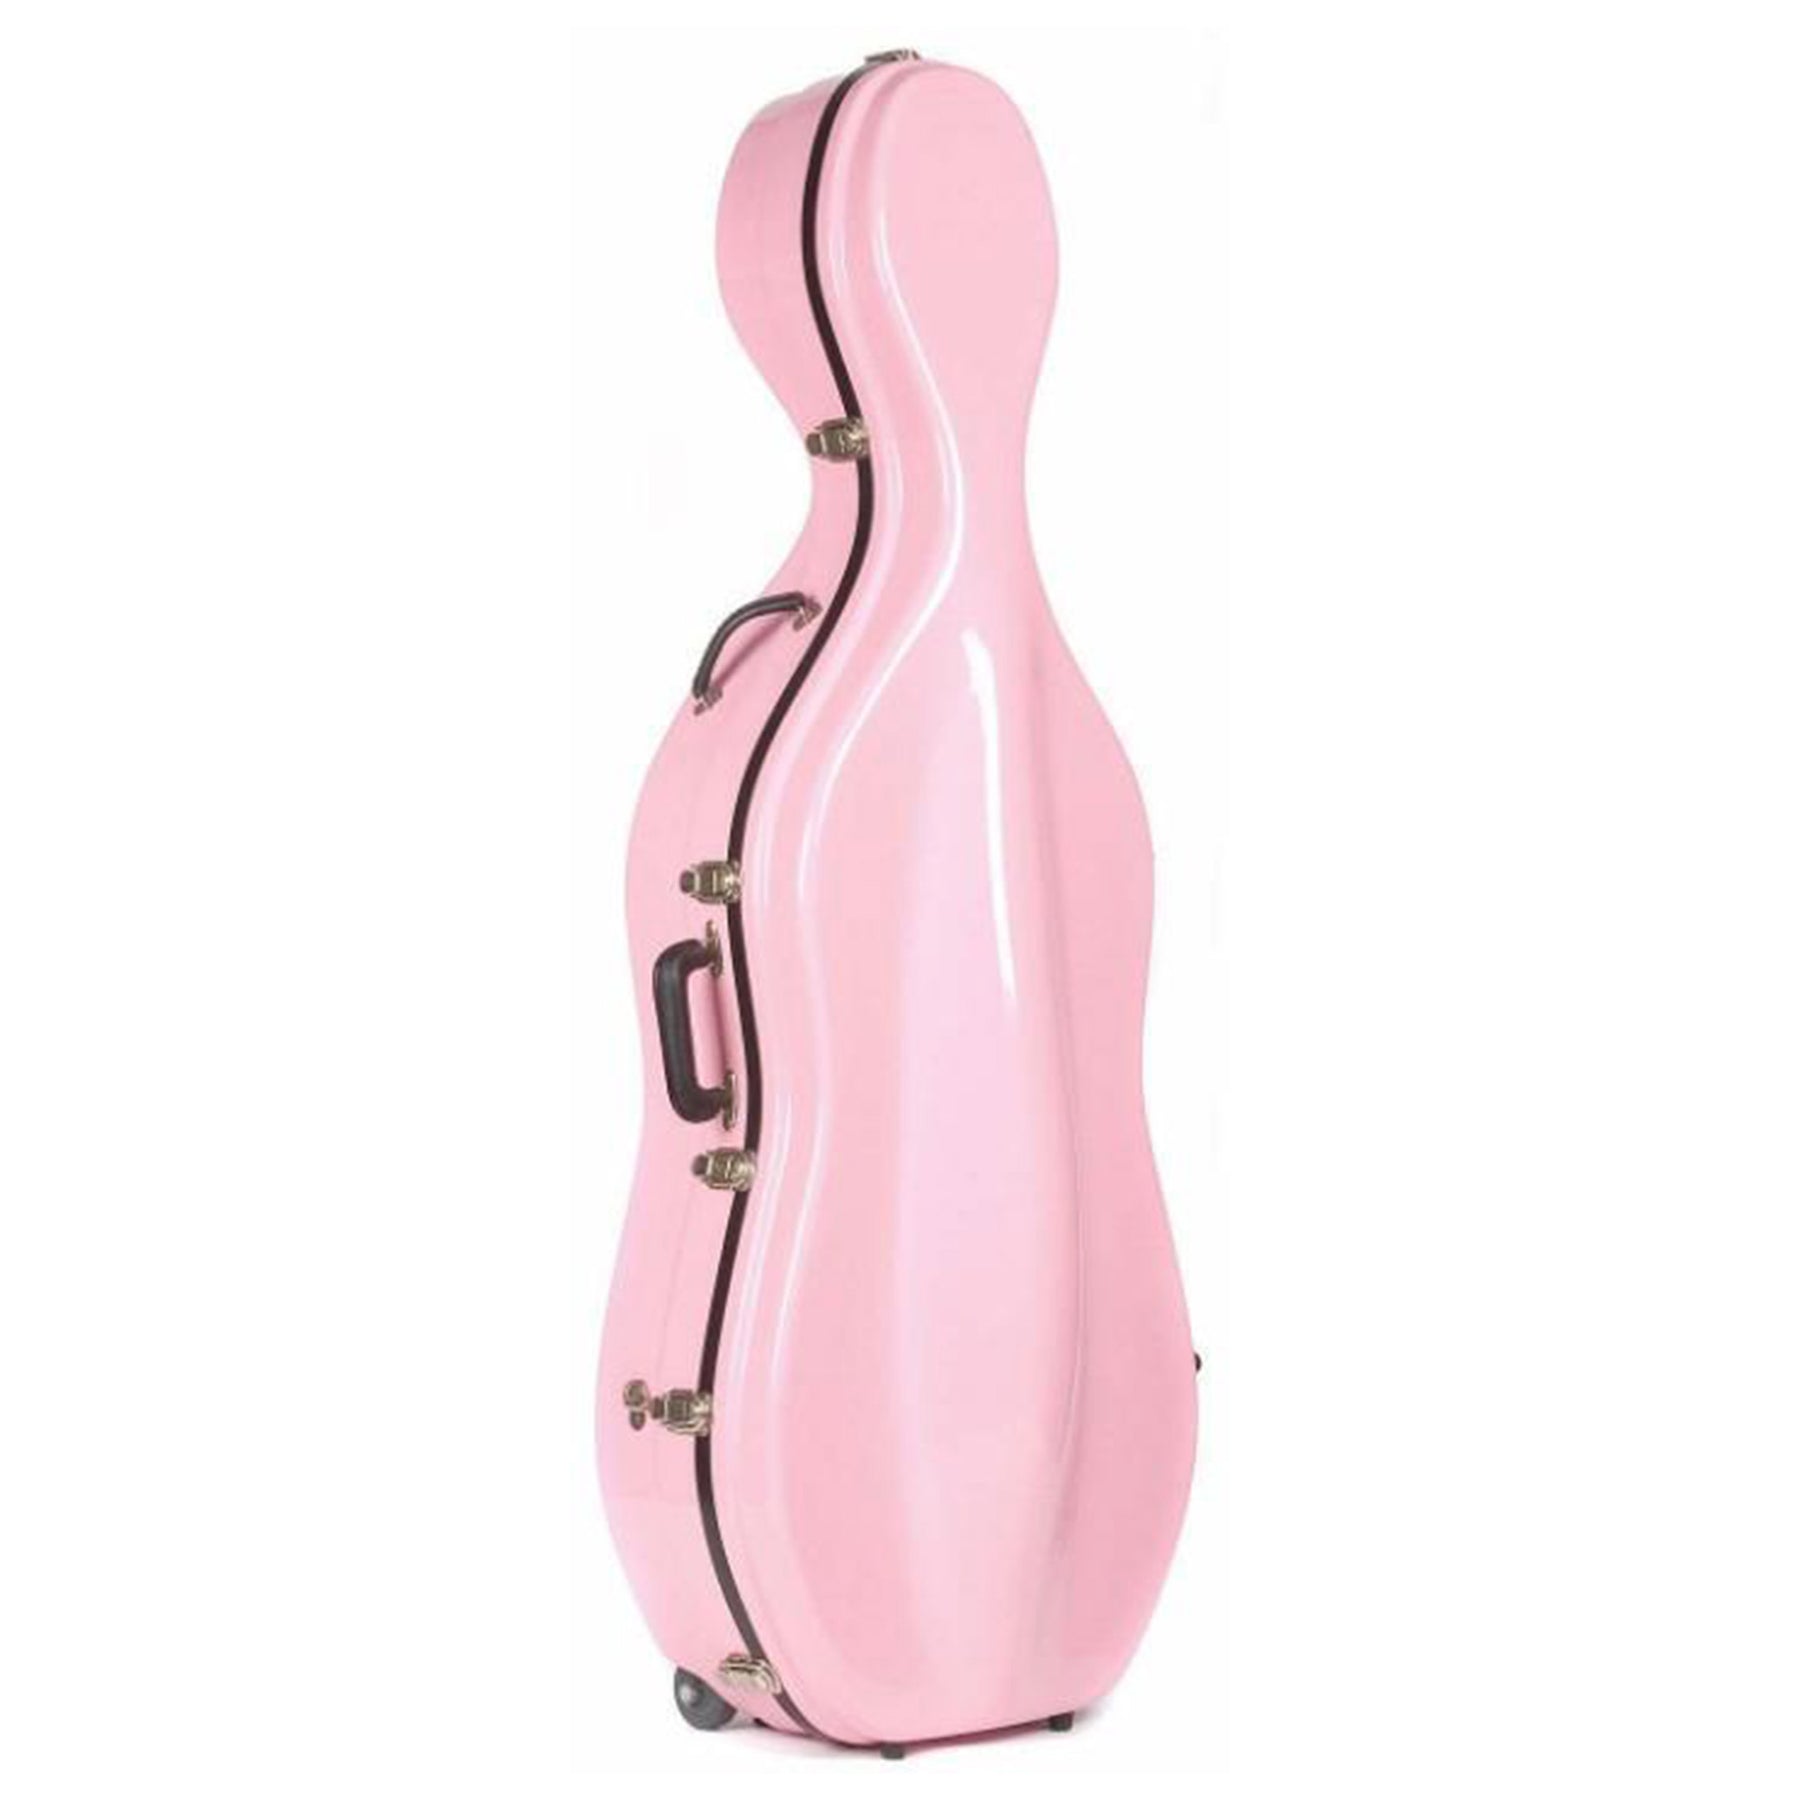 Pink Melodica by DaBell with Rugged Carrying Case